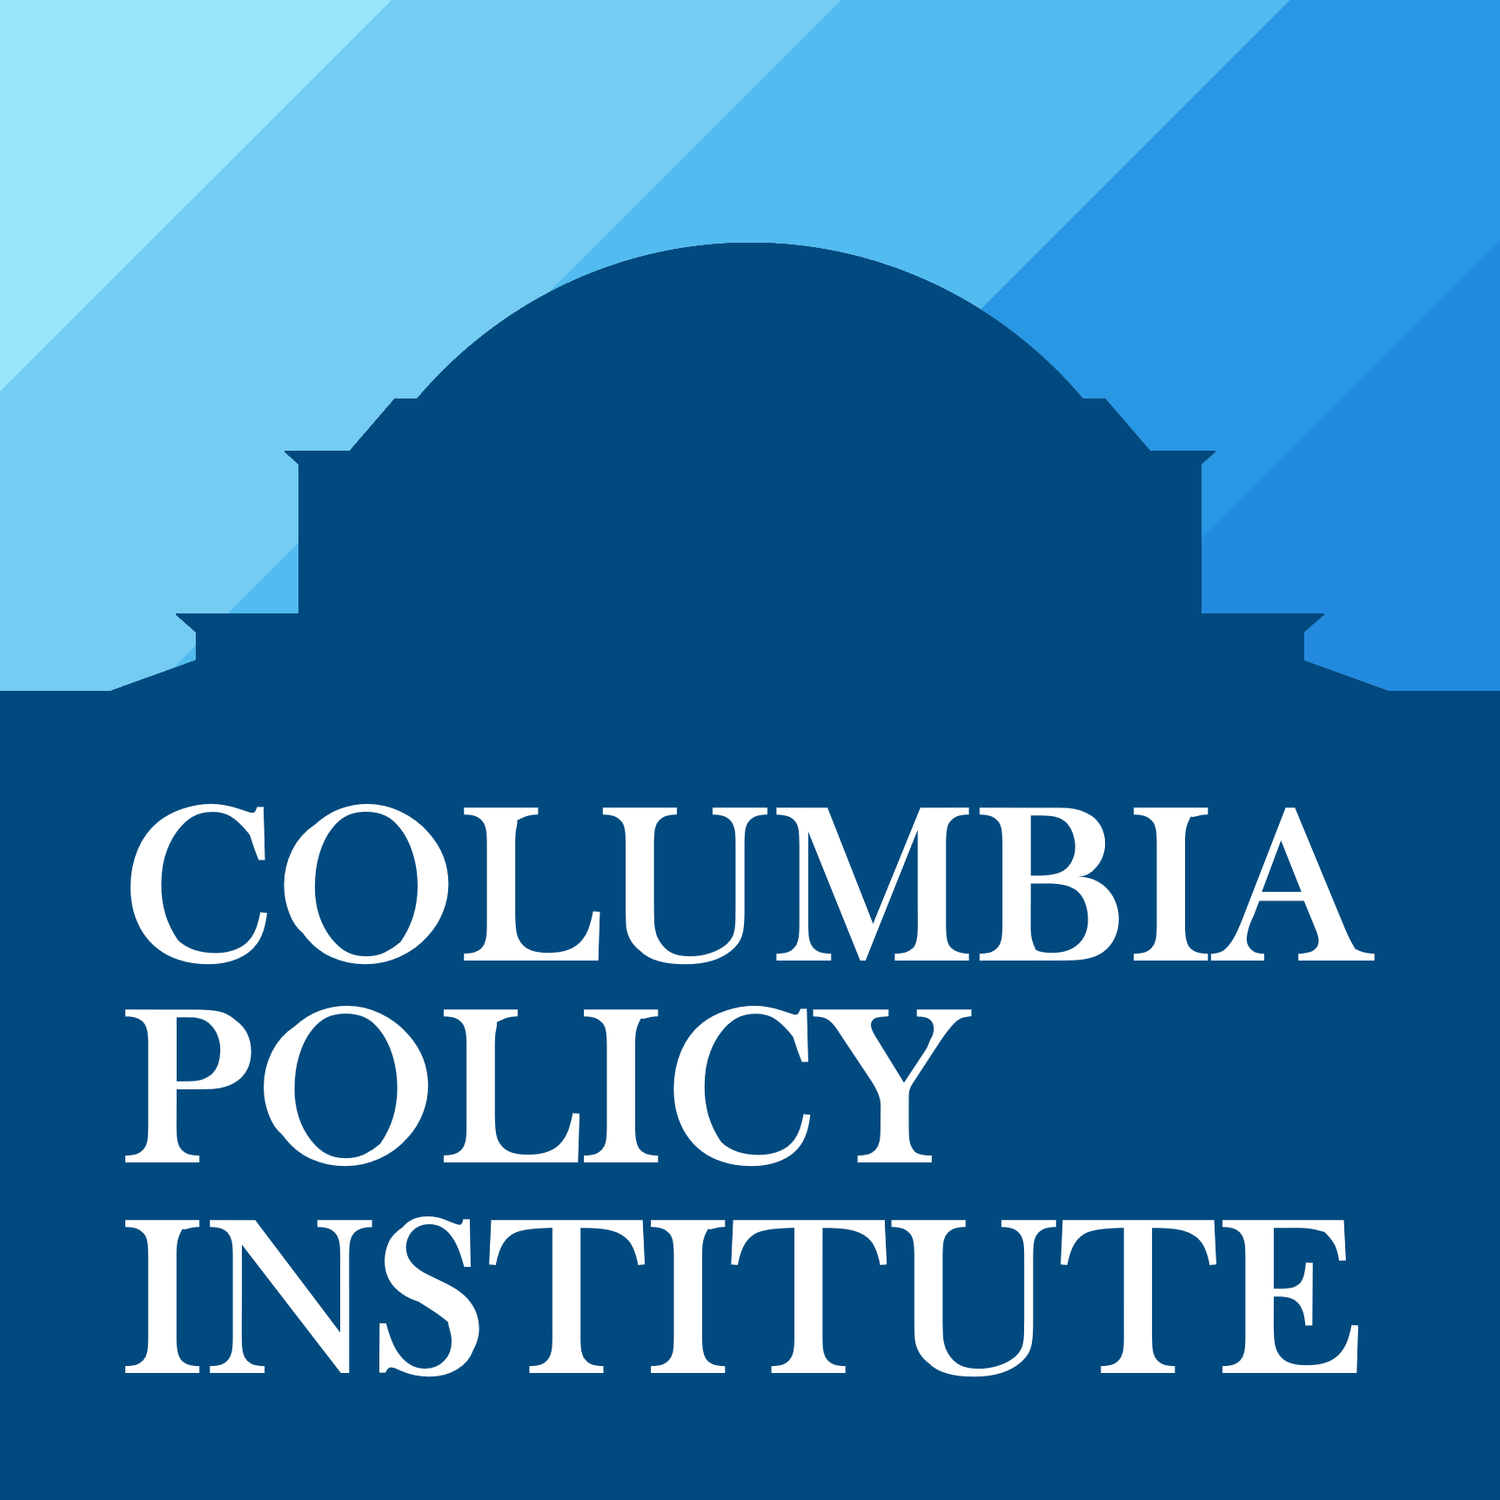 The Columbia Policy Institute